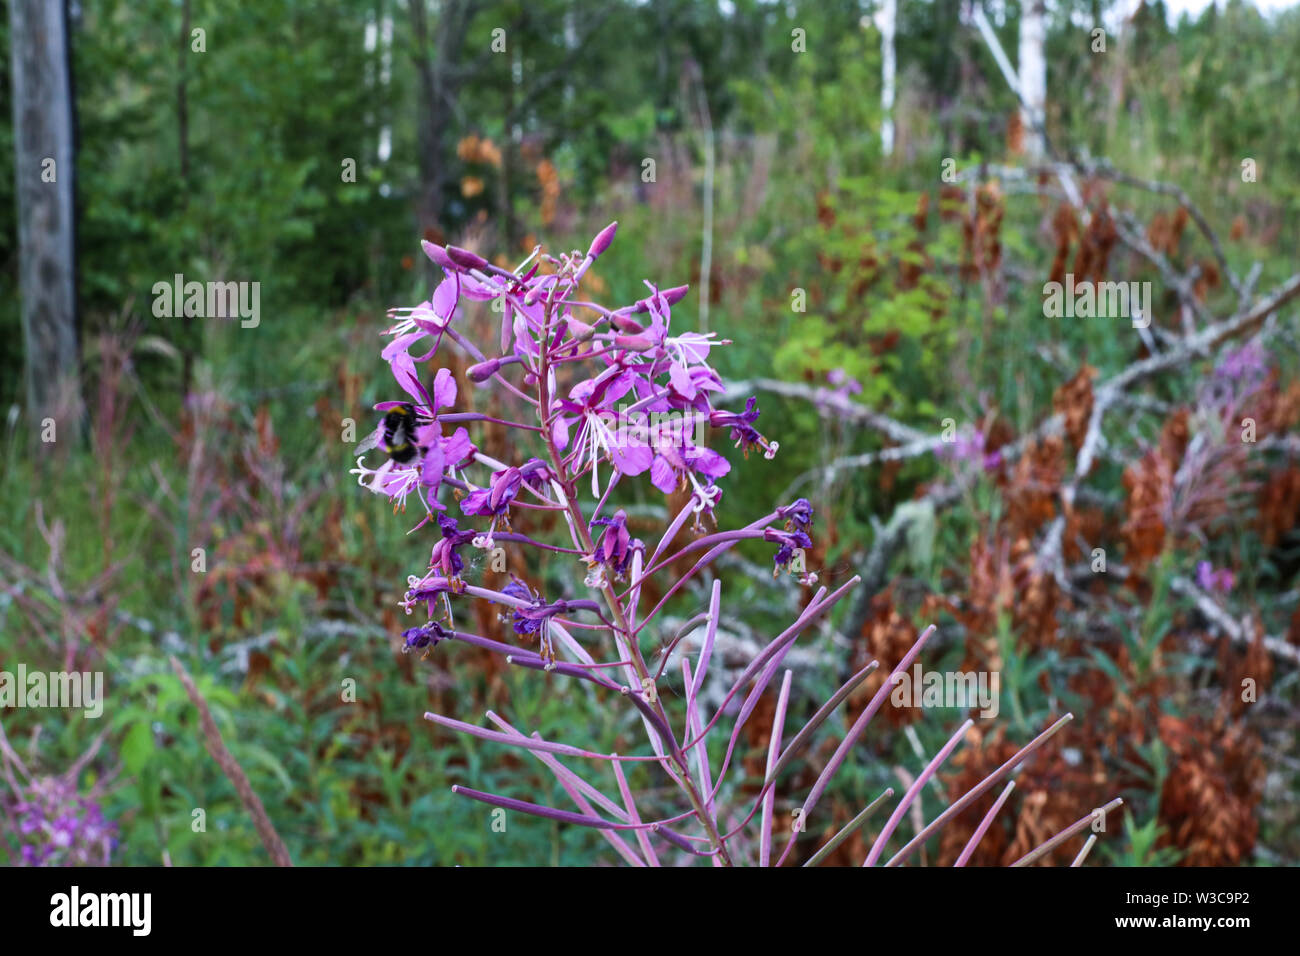 Fireweed a.k.a. rosebay willowherb growing on the dirt road side in Ylöjärvi, Finland Stock Photo